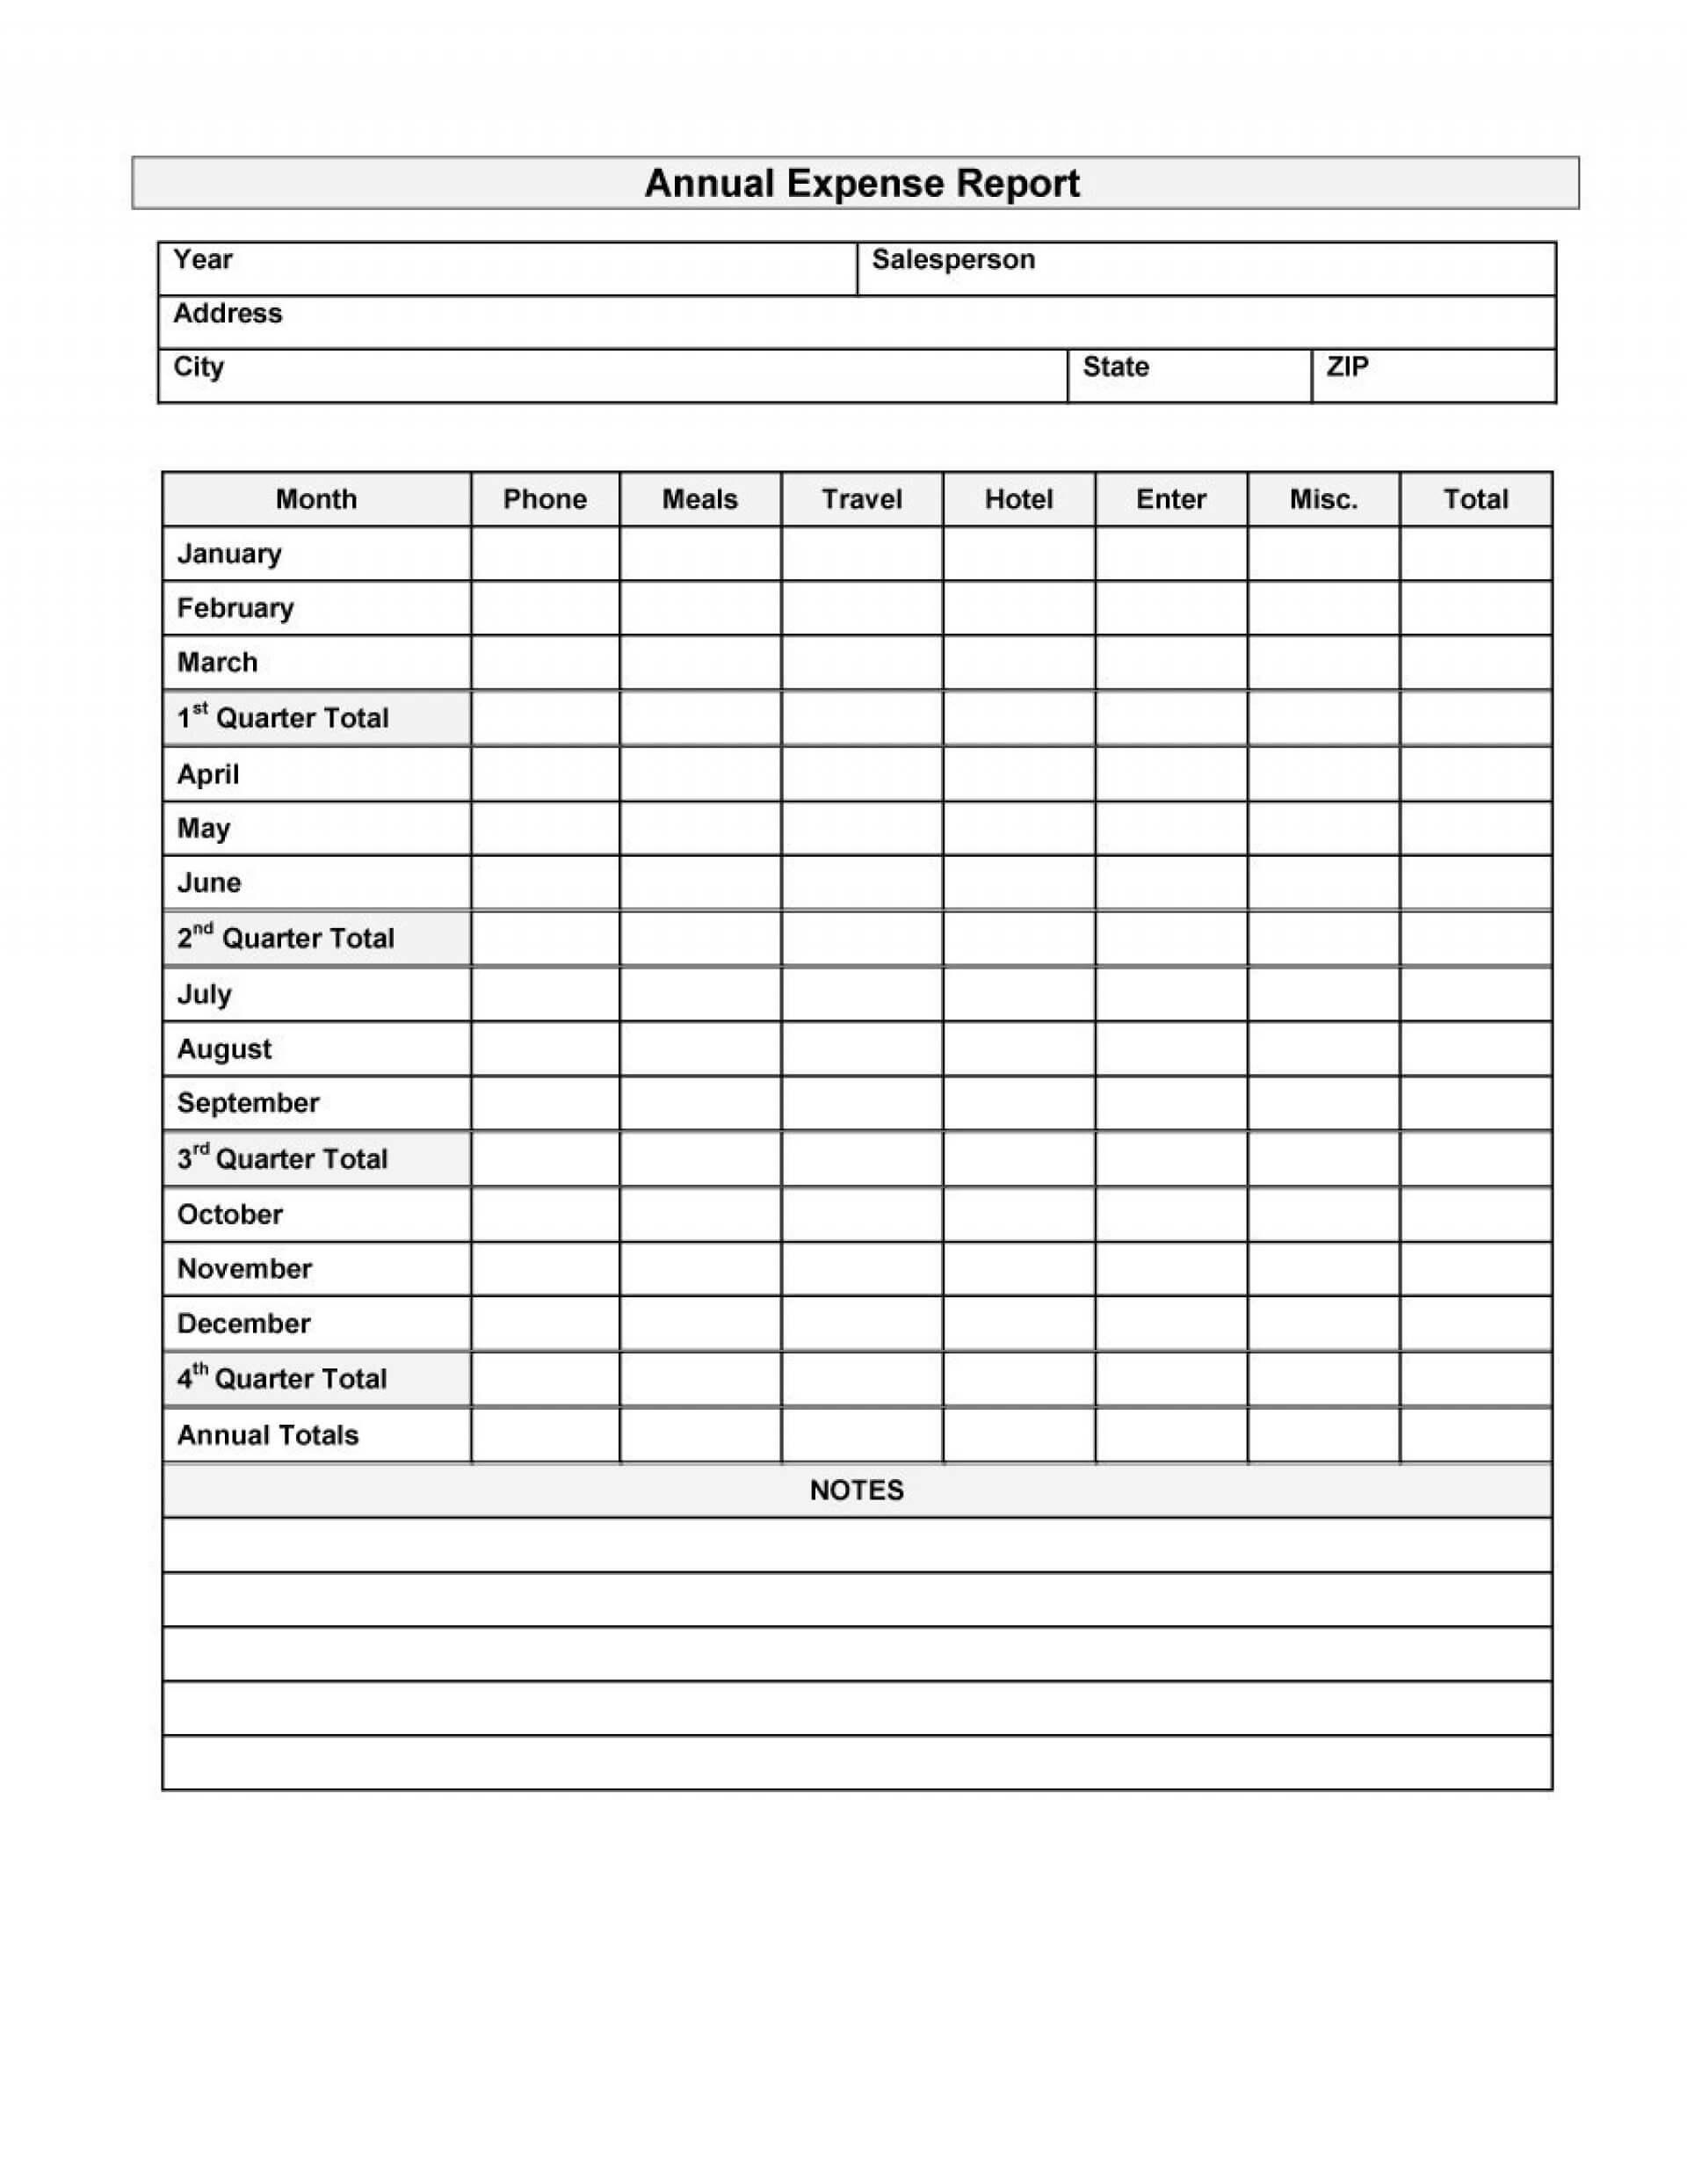 025 Expenses Report Template Excel Expense Magnificent Ideas Within Quarterly Report Template Small Business